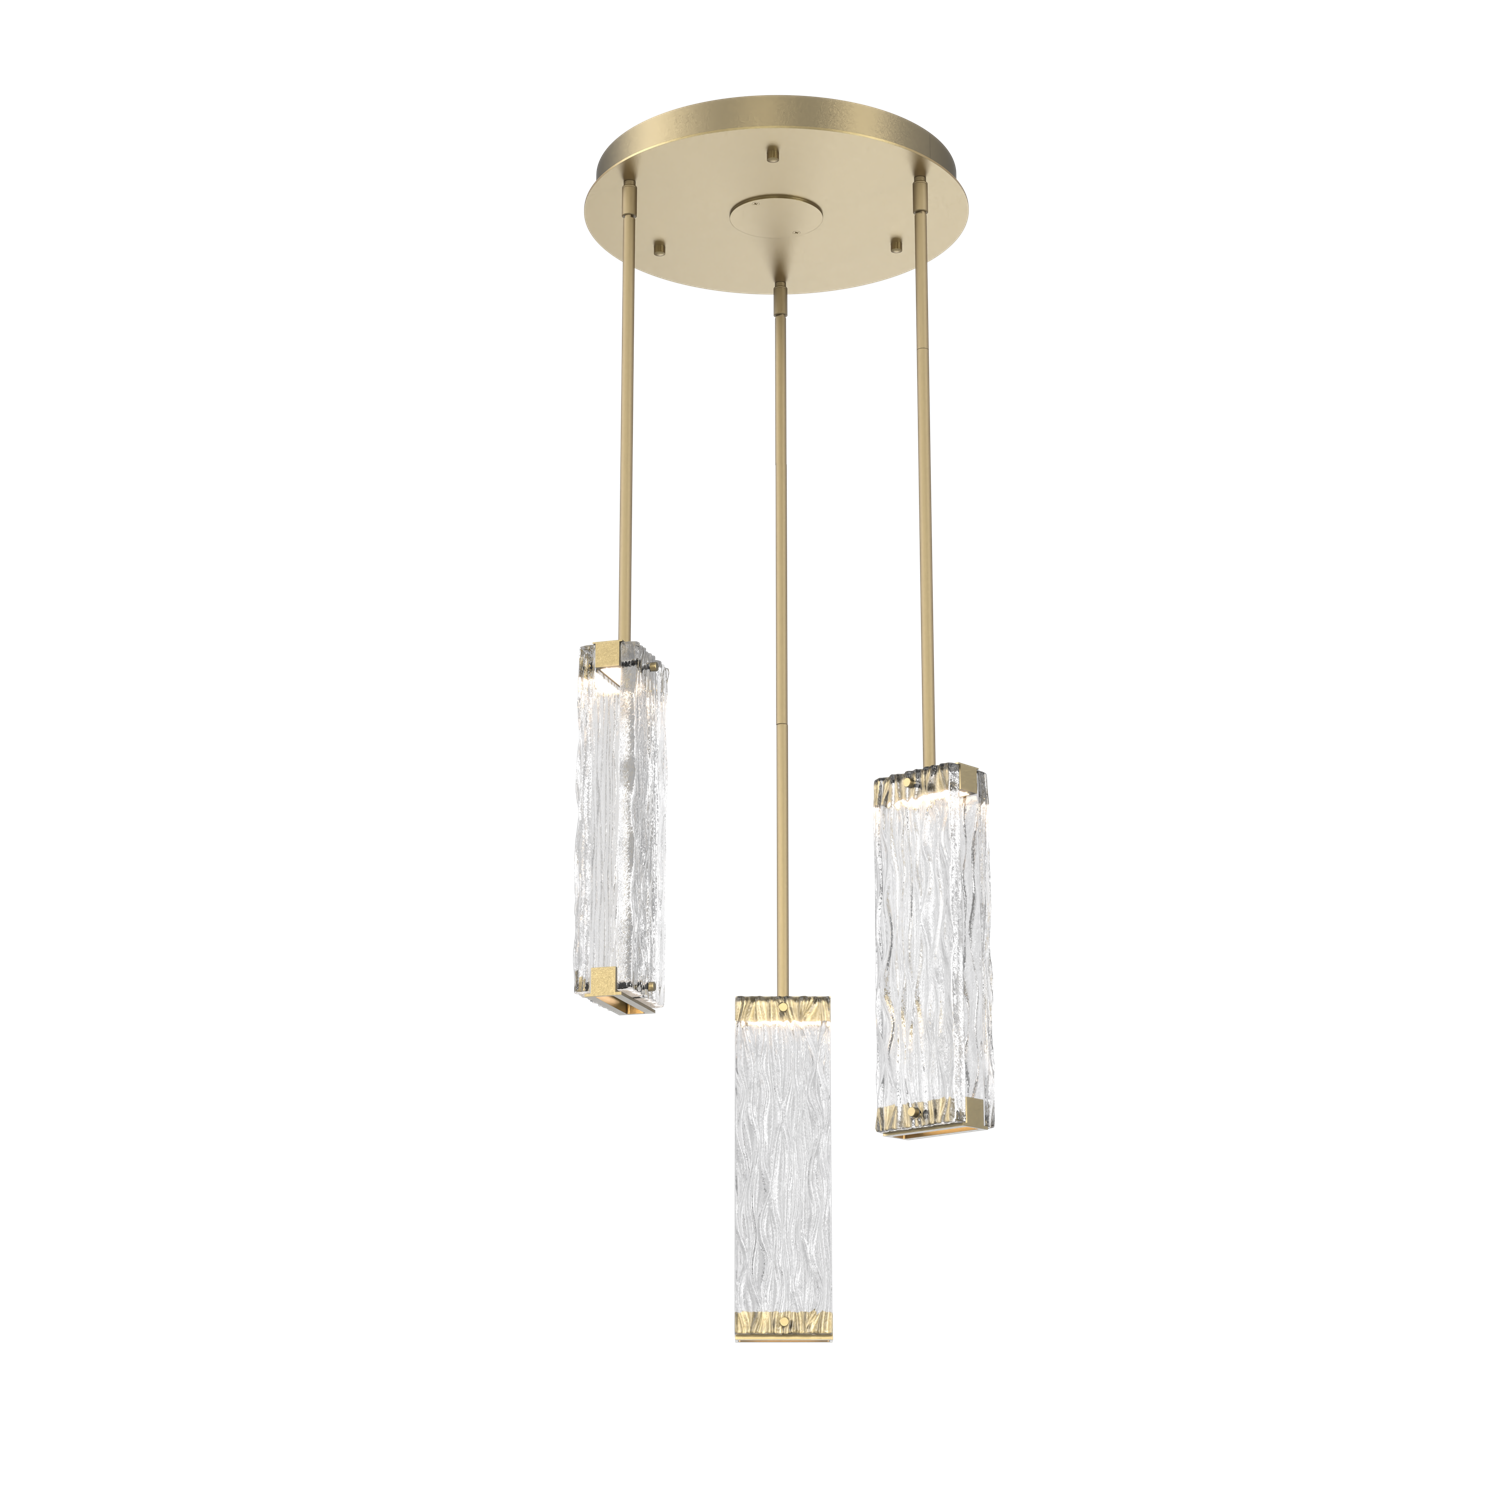 CHB0090-03-GB-TT-Hammerton-Studio-Tabulo-3-light-multi-pendant-chandelier-with-gilded-brass-finish-and-clear-tidal-cast-glass-shade-and-LED-lamping